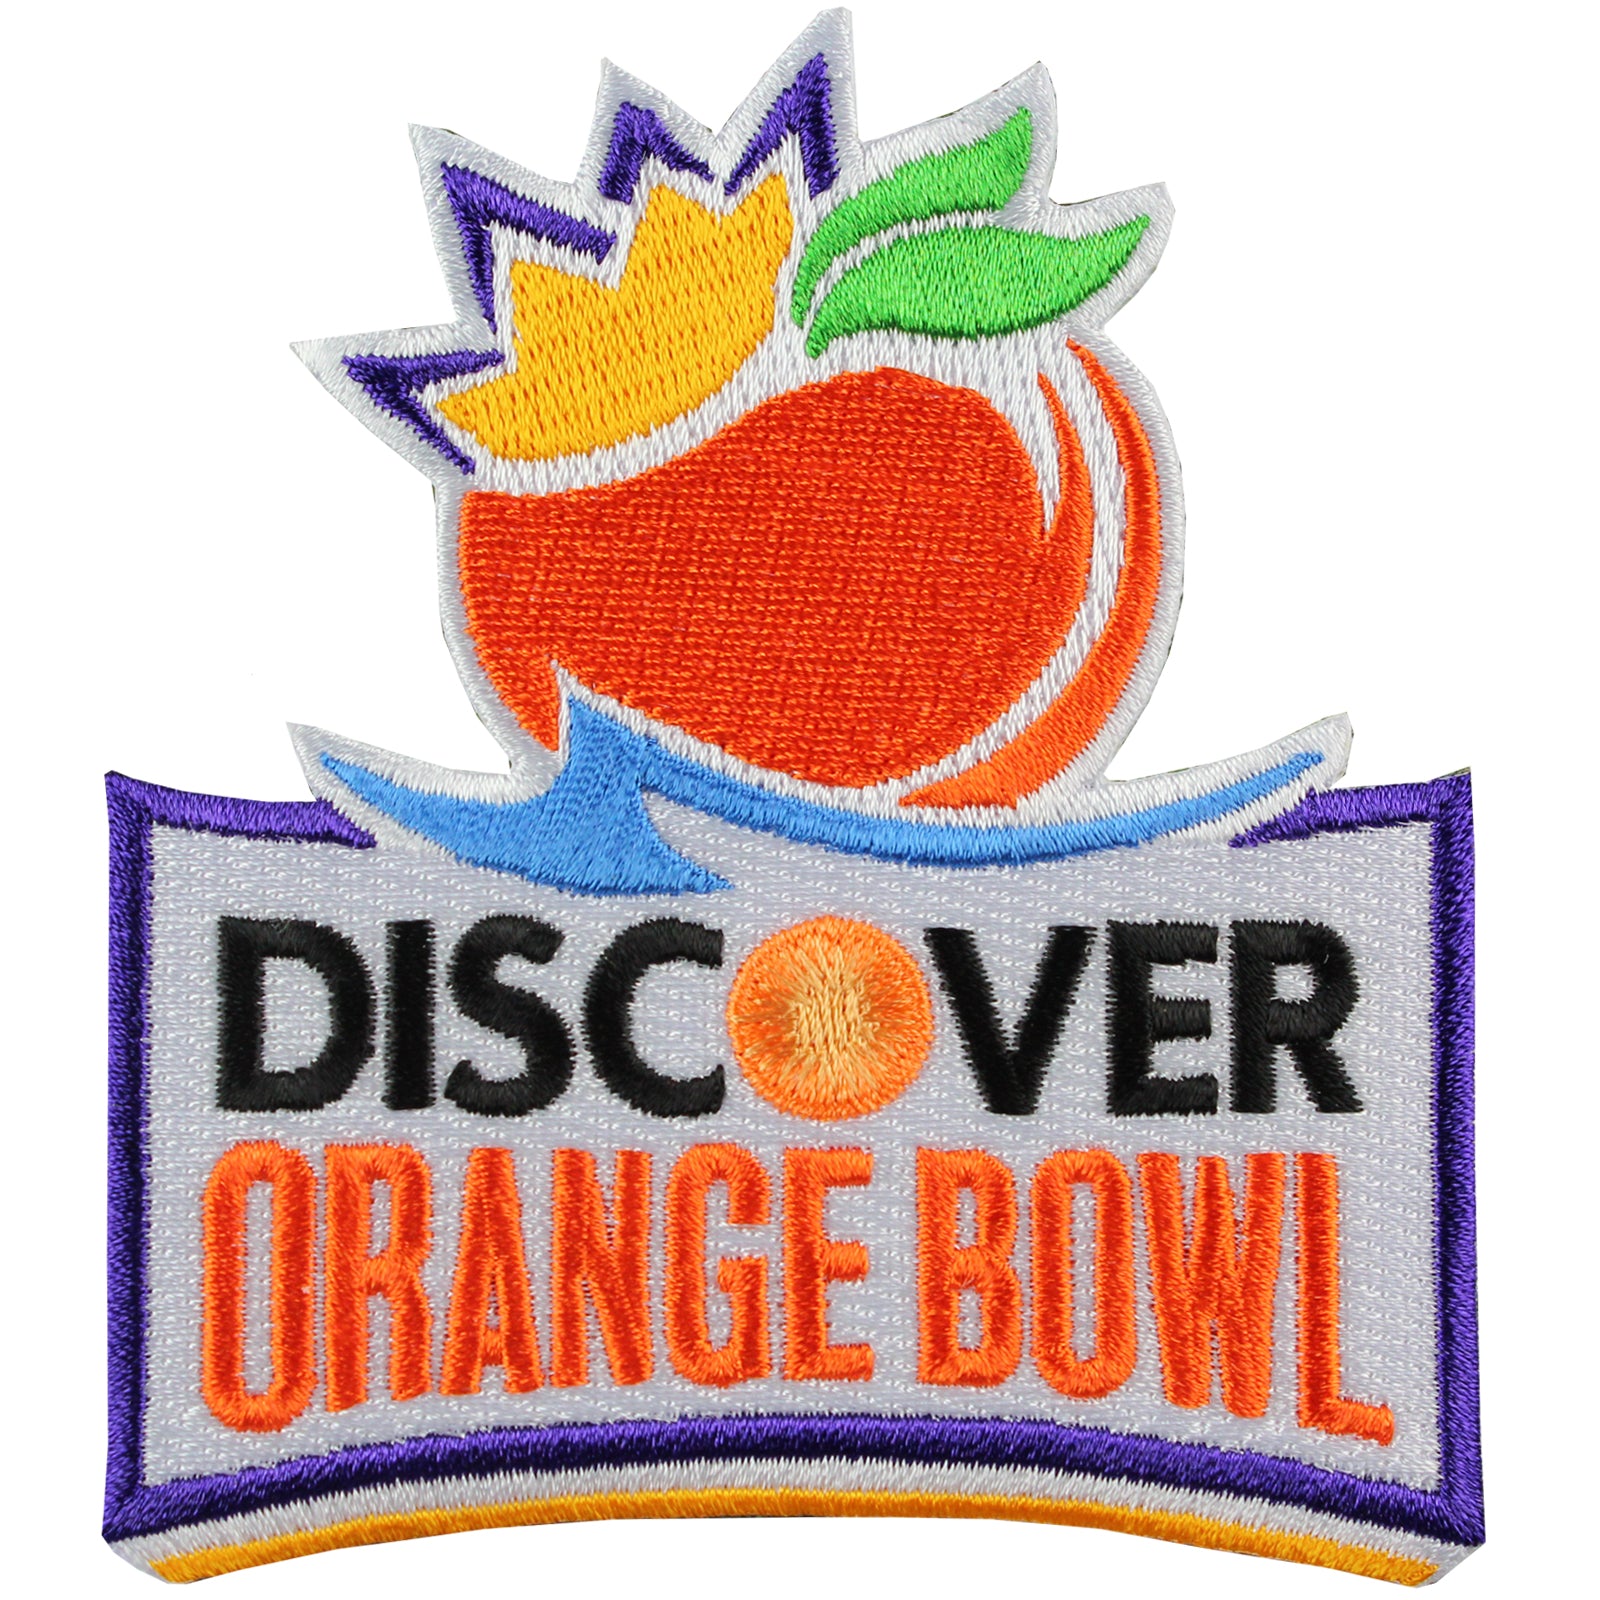 Discover Orange Bowl Game Jersey Patch (2014 Clemson vs. Ohio State) 